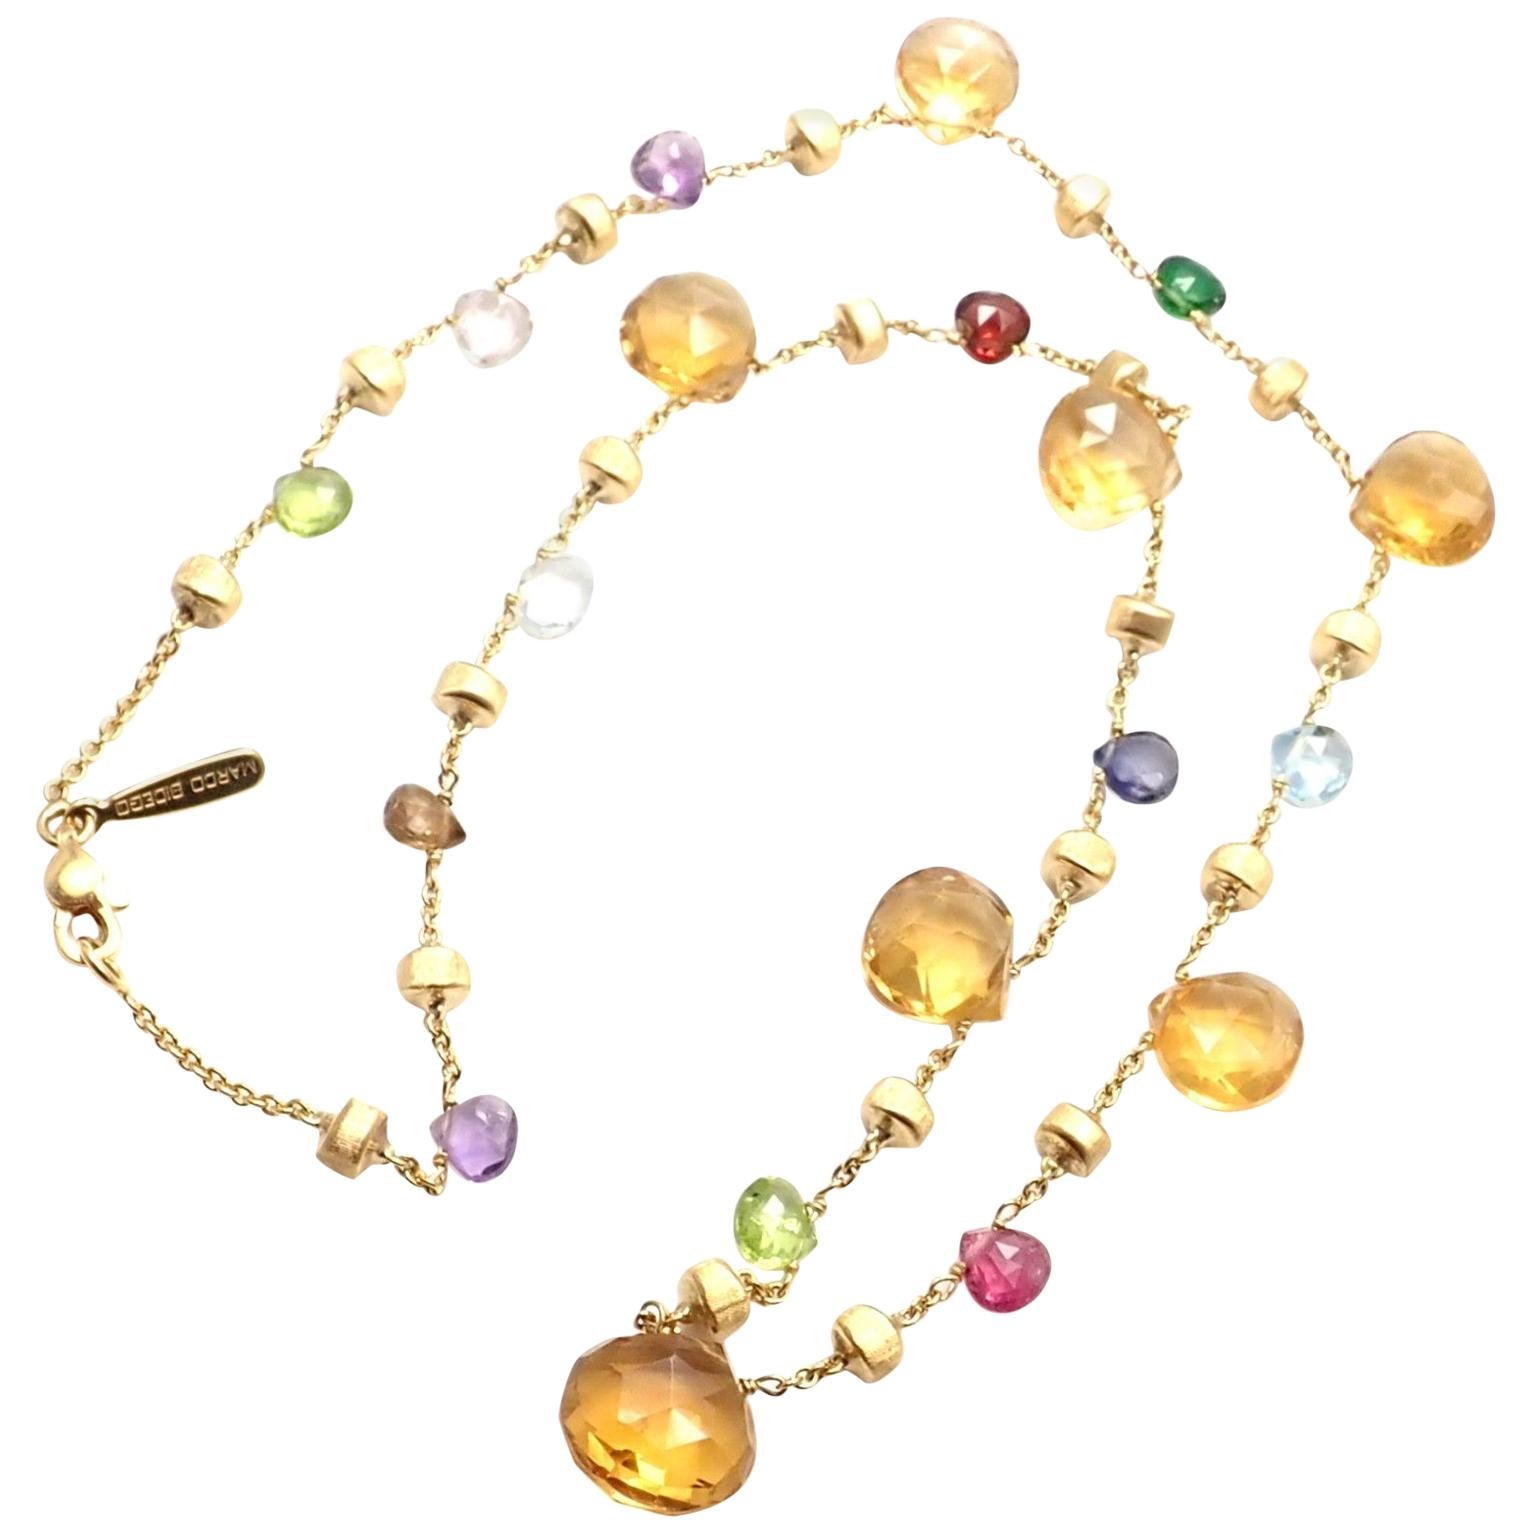 Marco Bicego Paradise Multi-Colored Gemstone Yellow Gold Necklace